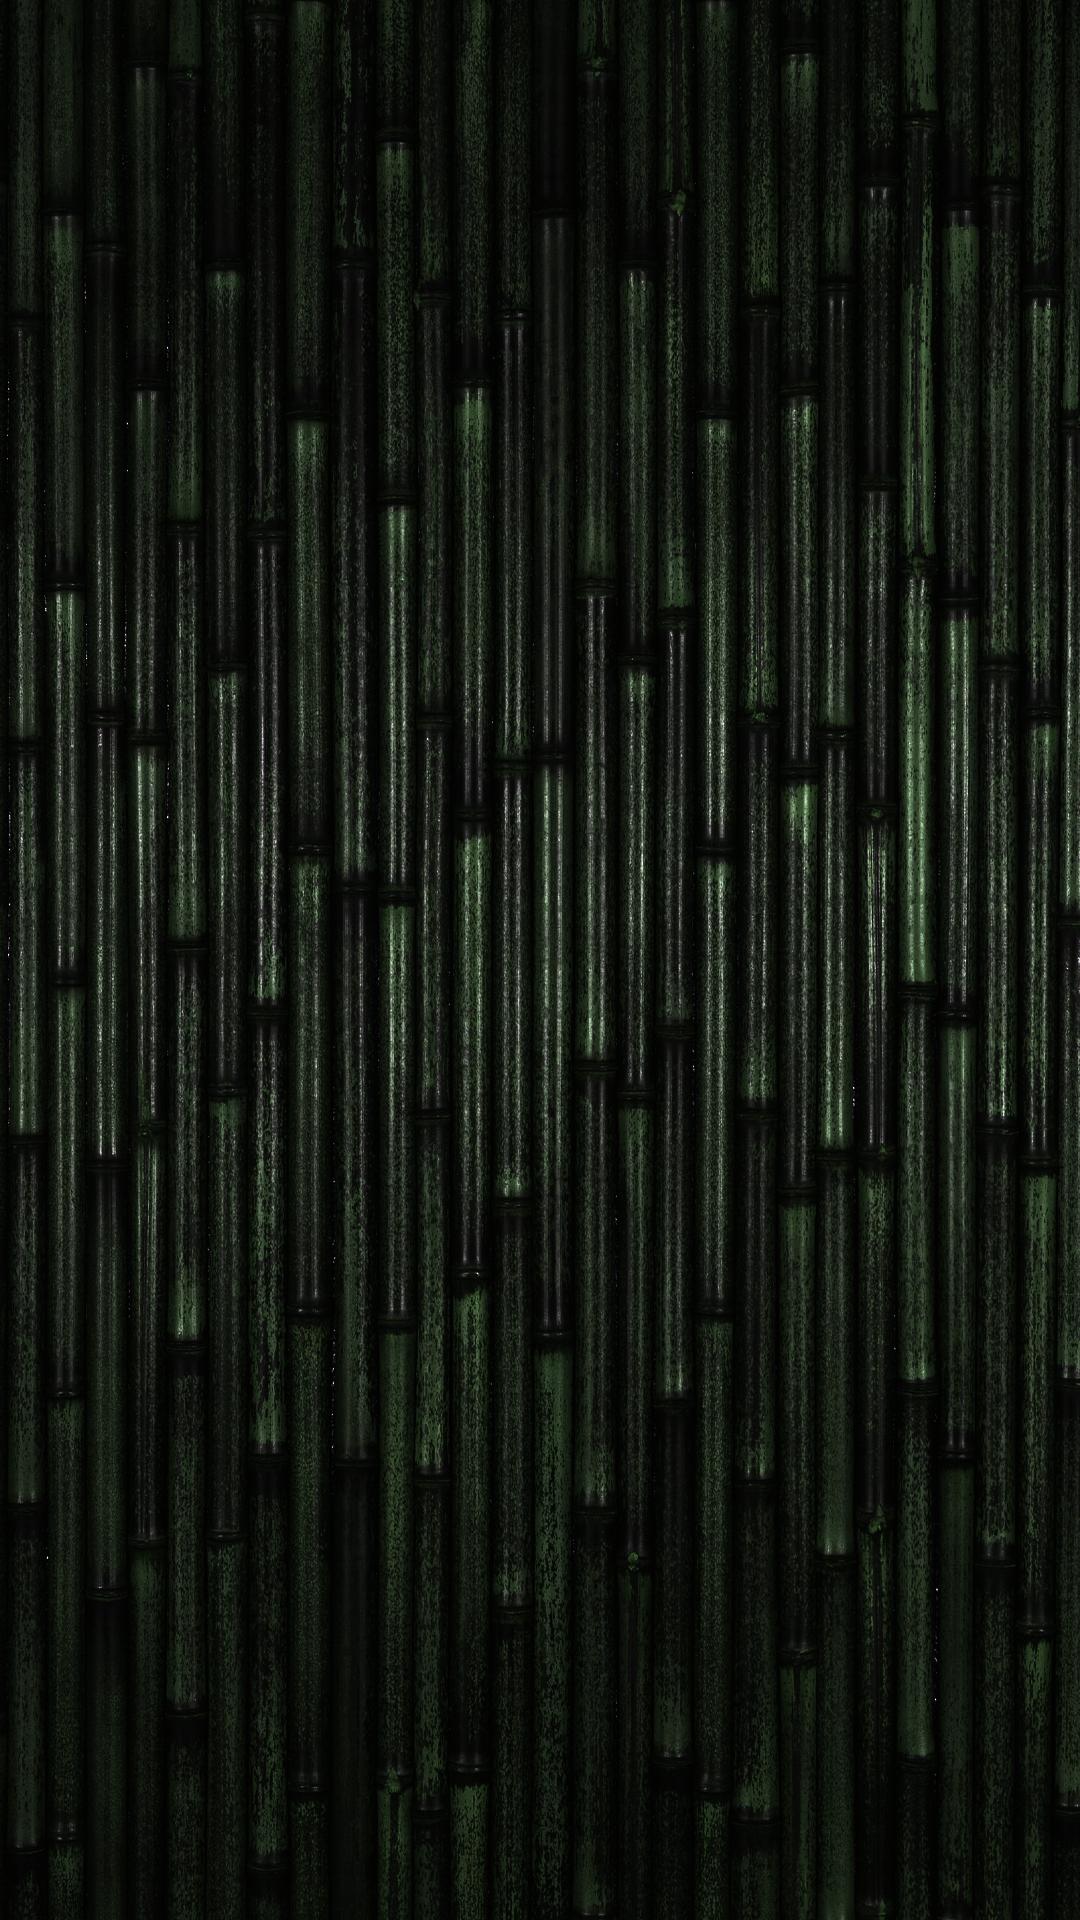 Green and Black Smartphone Wallpapers - Top Free Green and Black ...